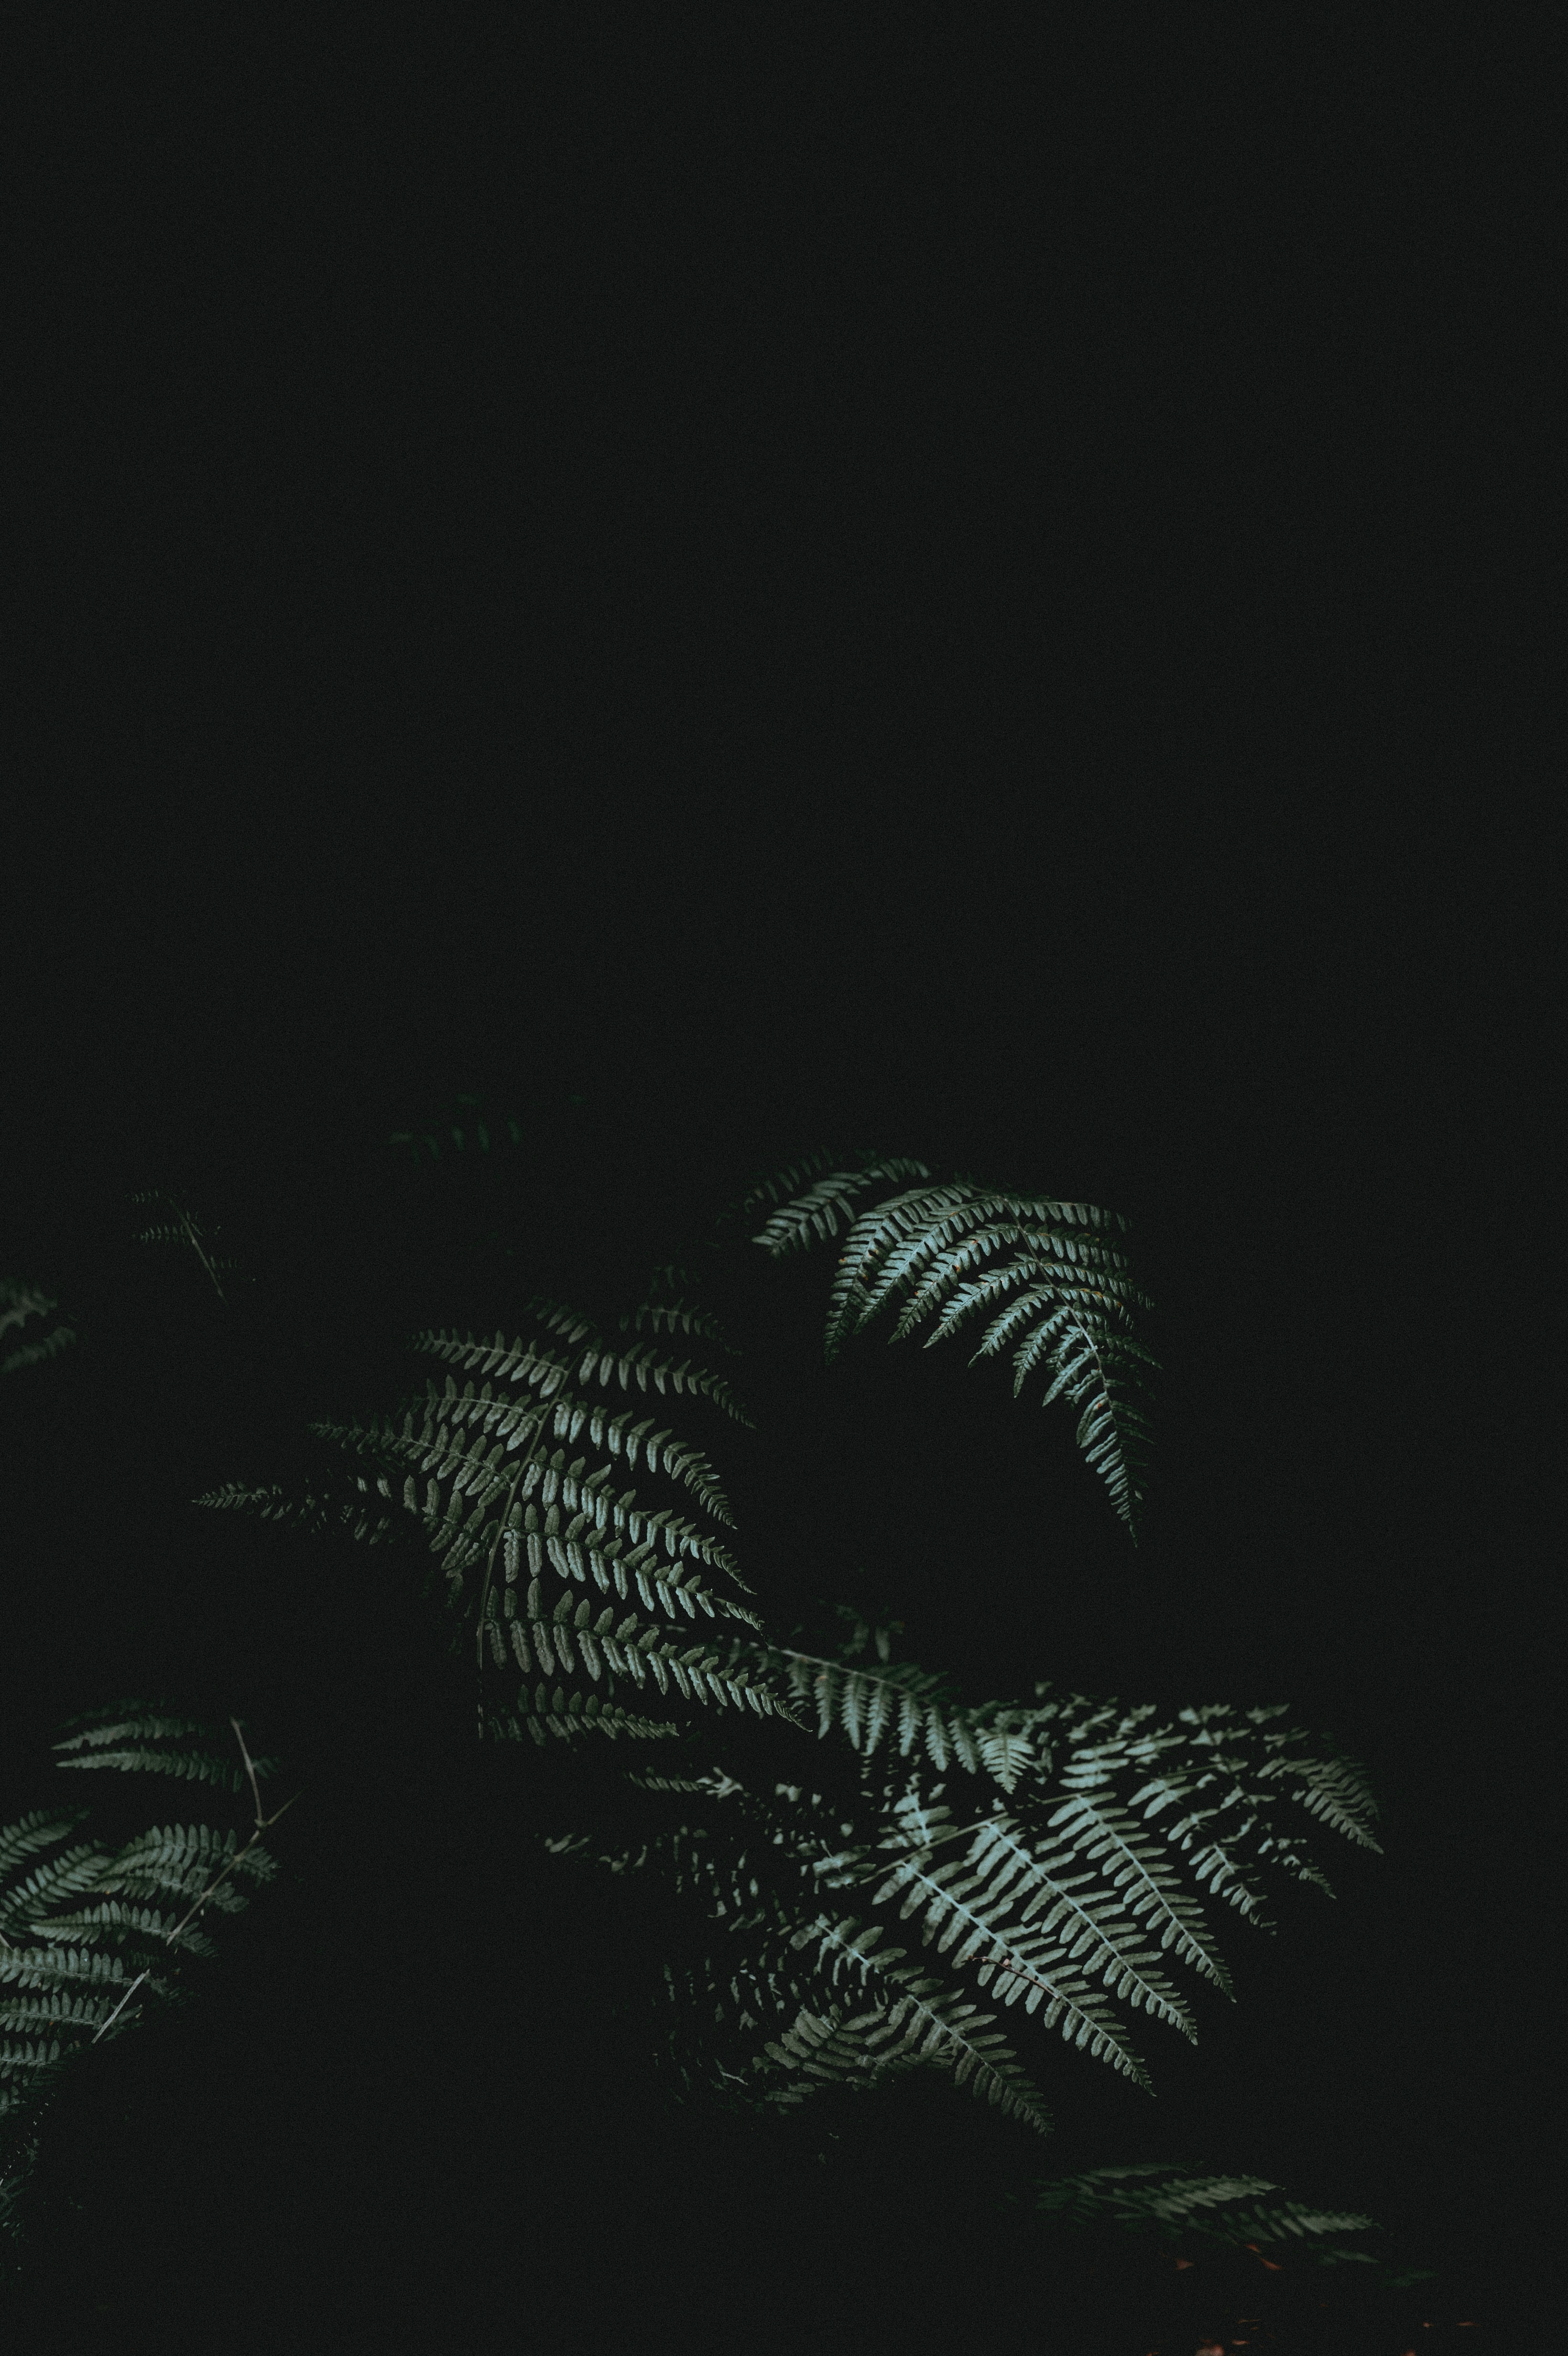 97621 download wallpaper leaves, plant, dark, fern, darkness screensavers and pictures for free